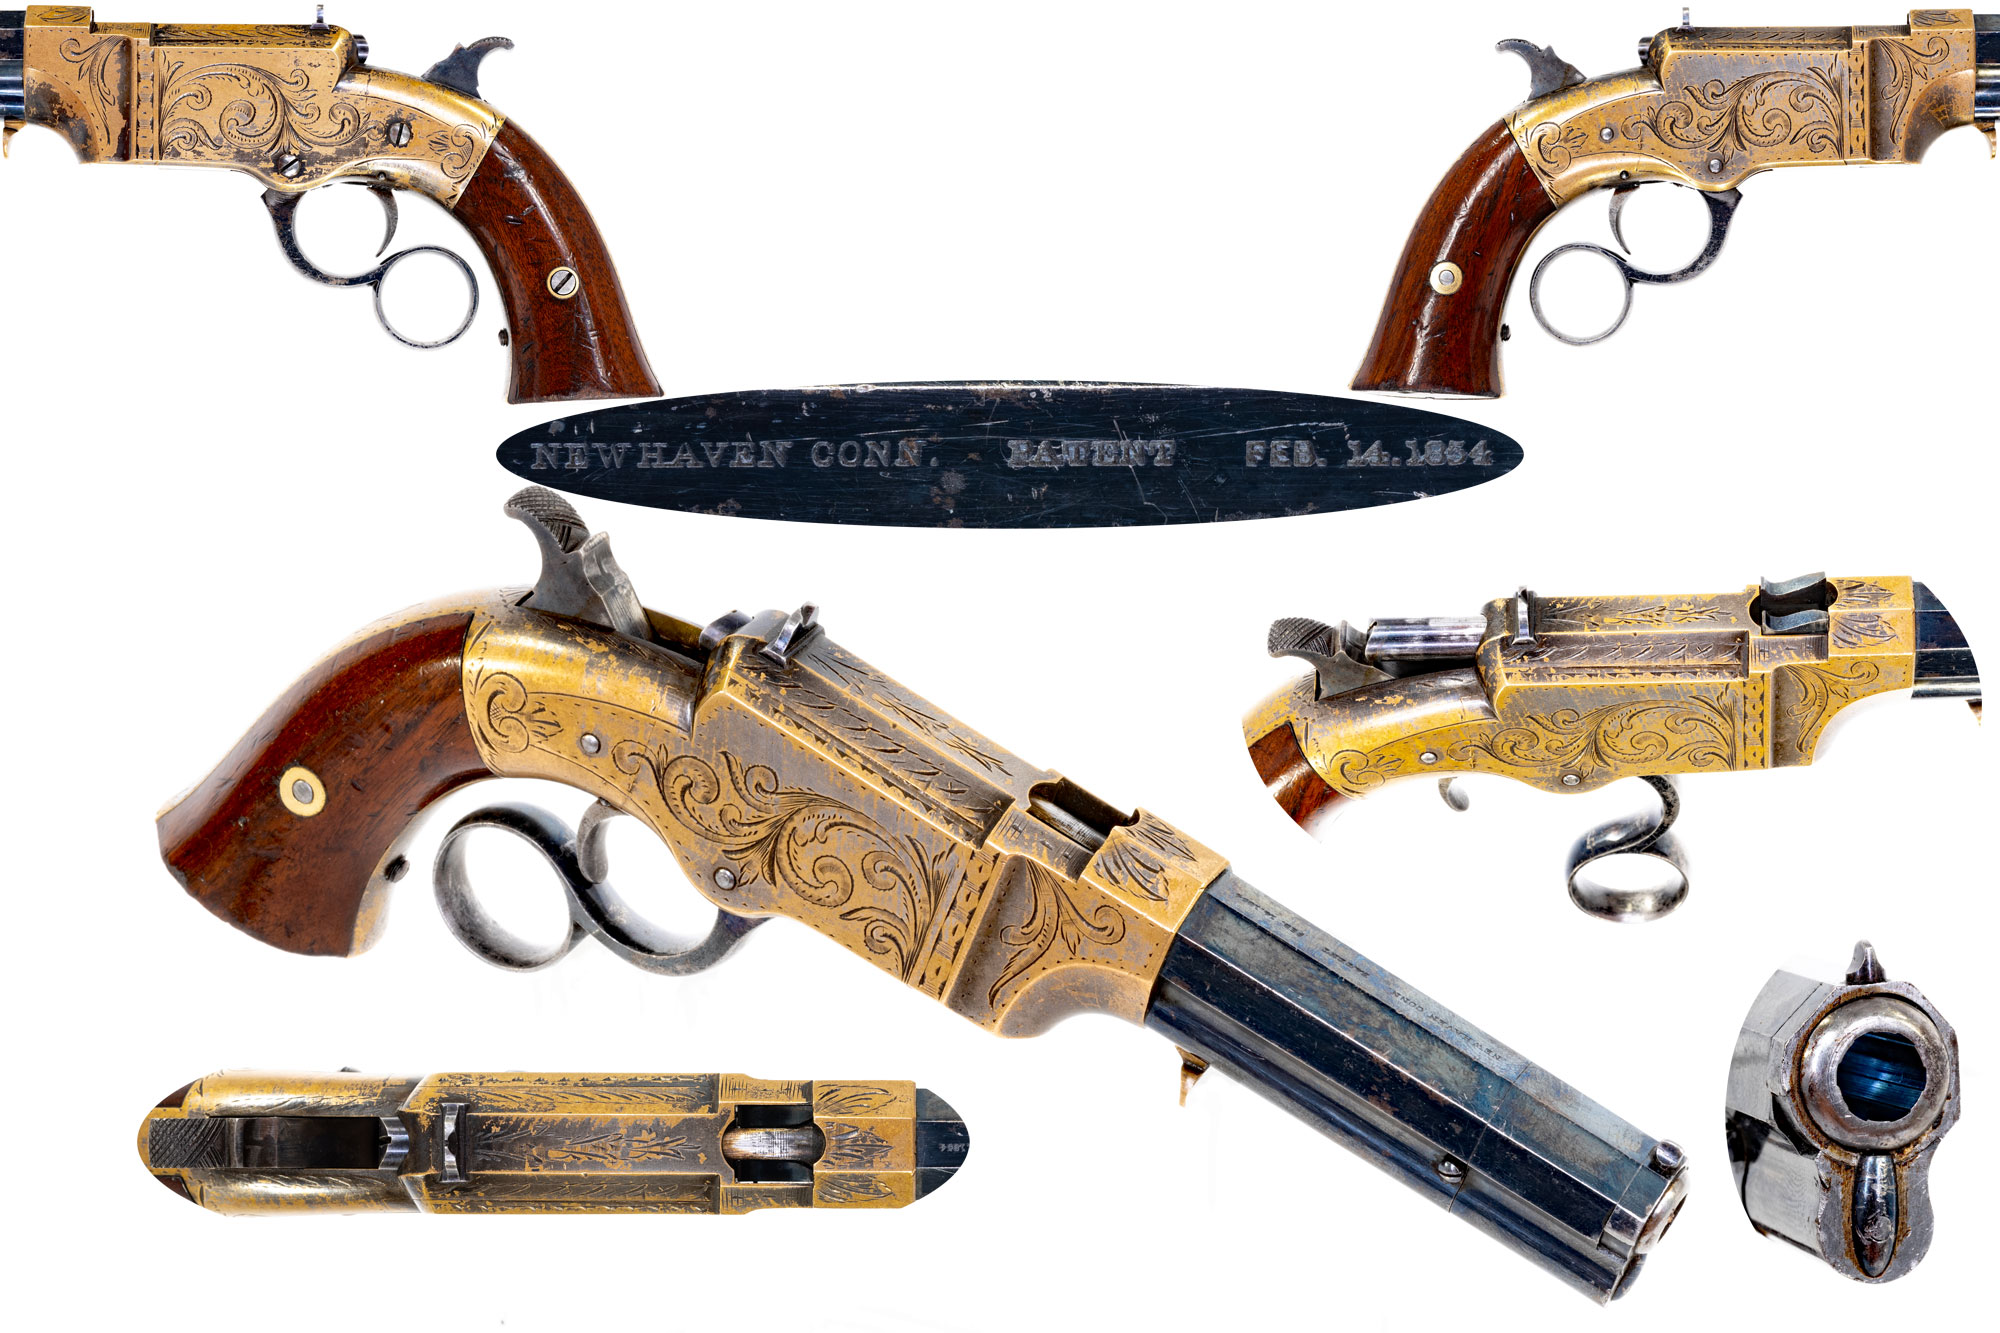 Image of Exceptional Factory Engraved New Haven Arms Company No.1 "Volcanic" Pocket Pistol